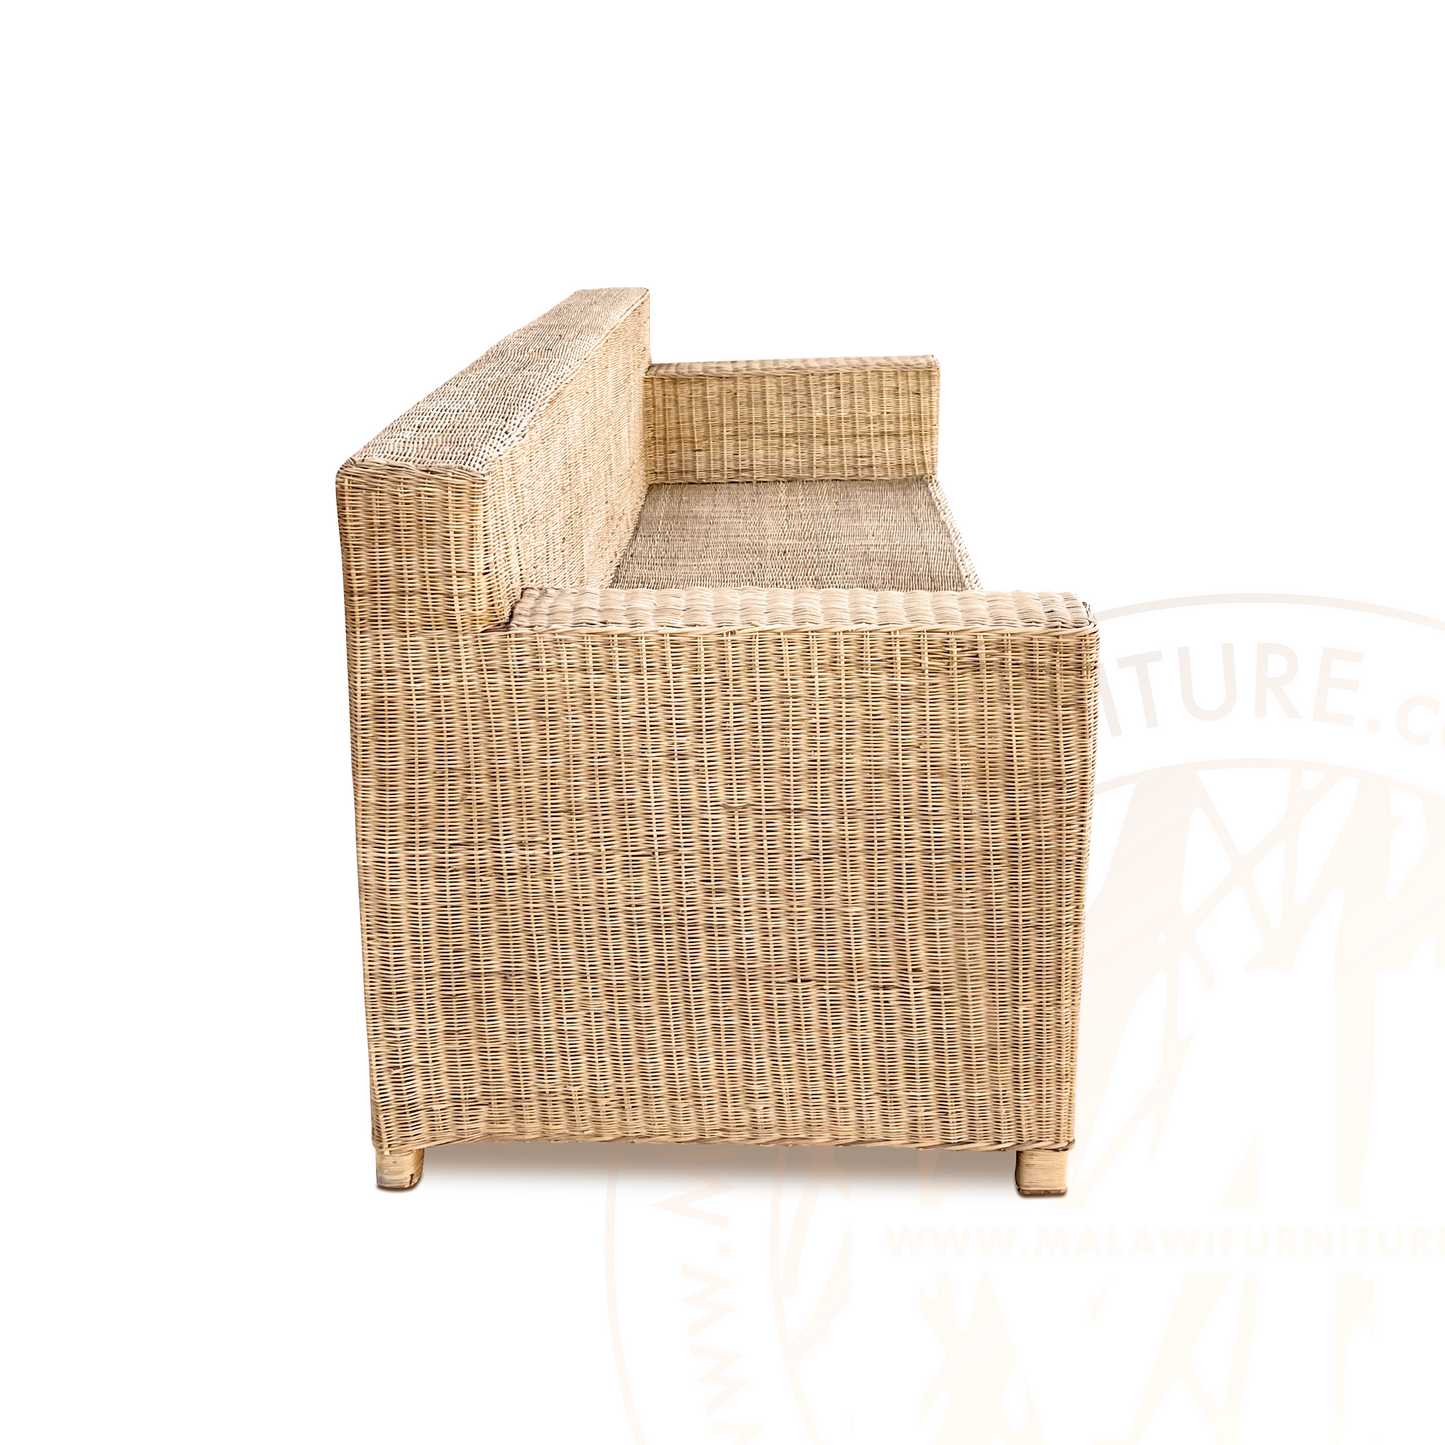 BOX Malawi Couch – Three Seater hand weaved woven rattan cane chair malawi patio outdoor